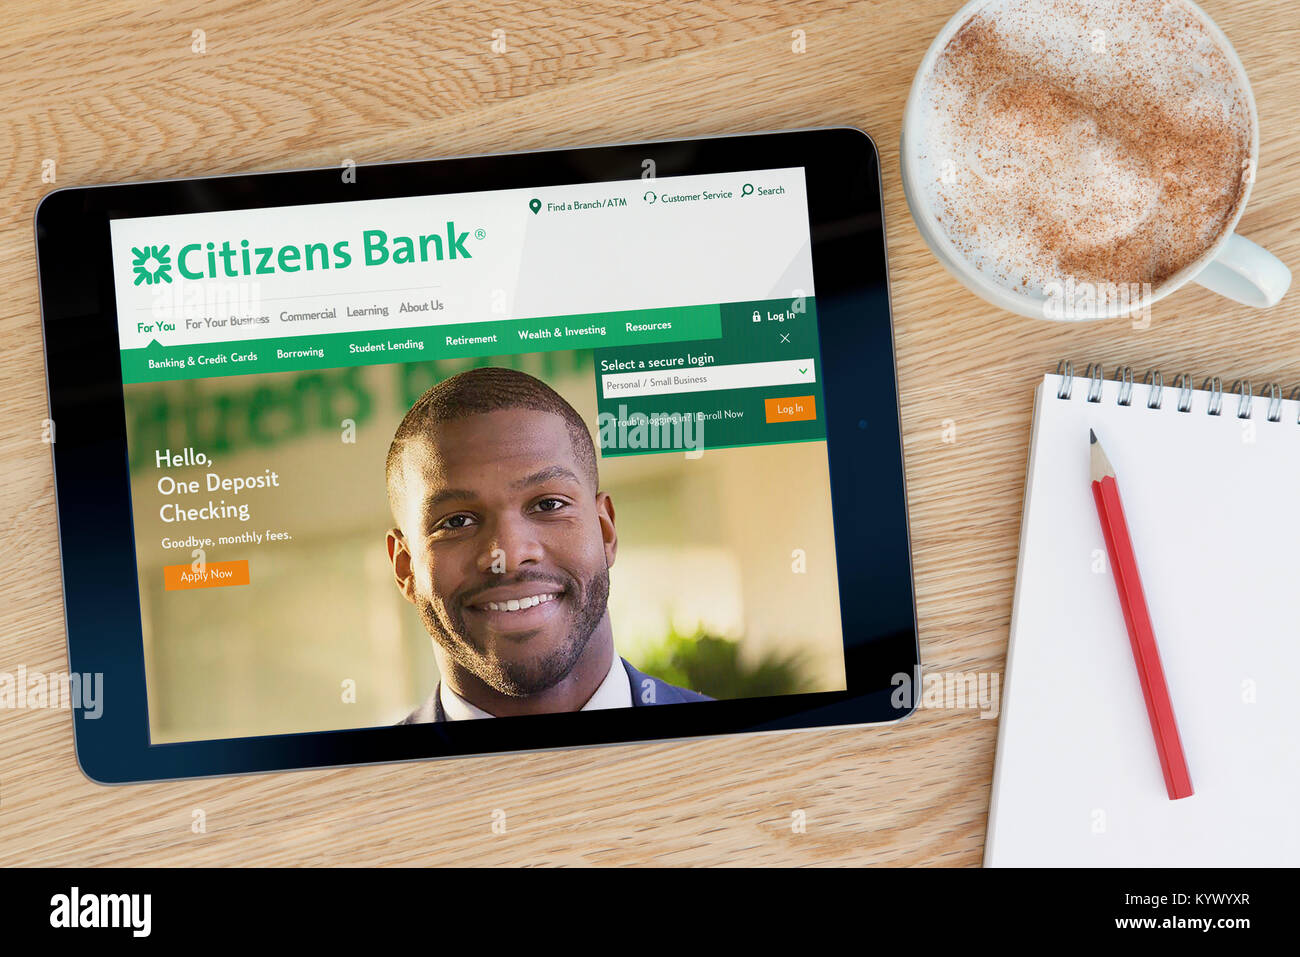 The Citizens Bank website on an iPad tablet, on a wooden table beside a notepad, pencil and cup of coffee (Editorial only) Stock Photo